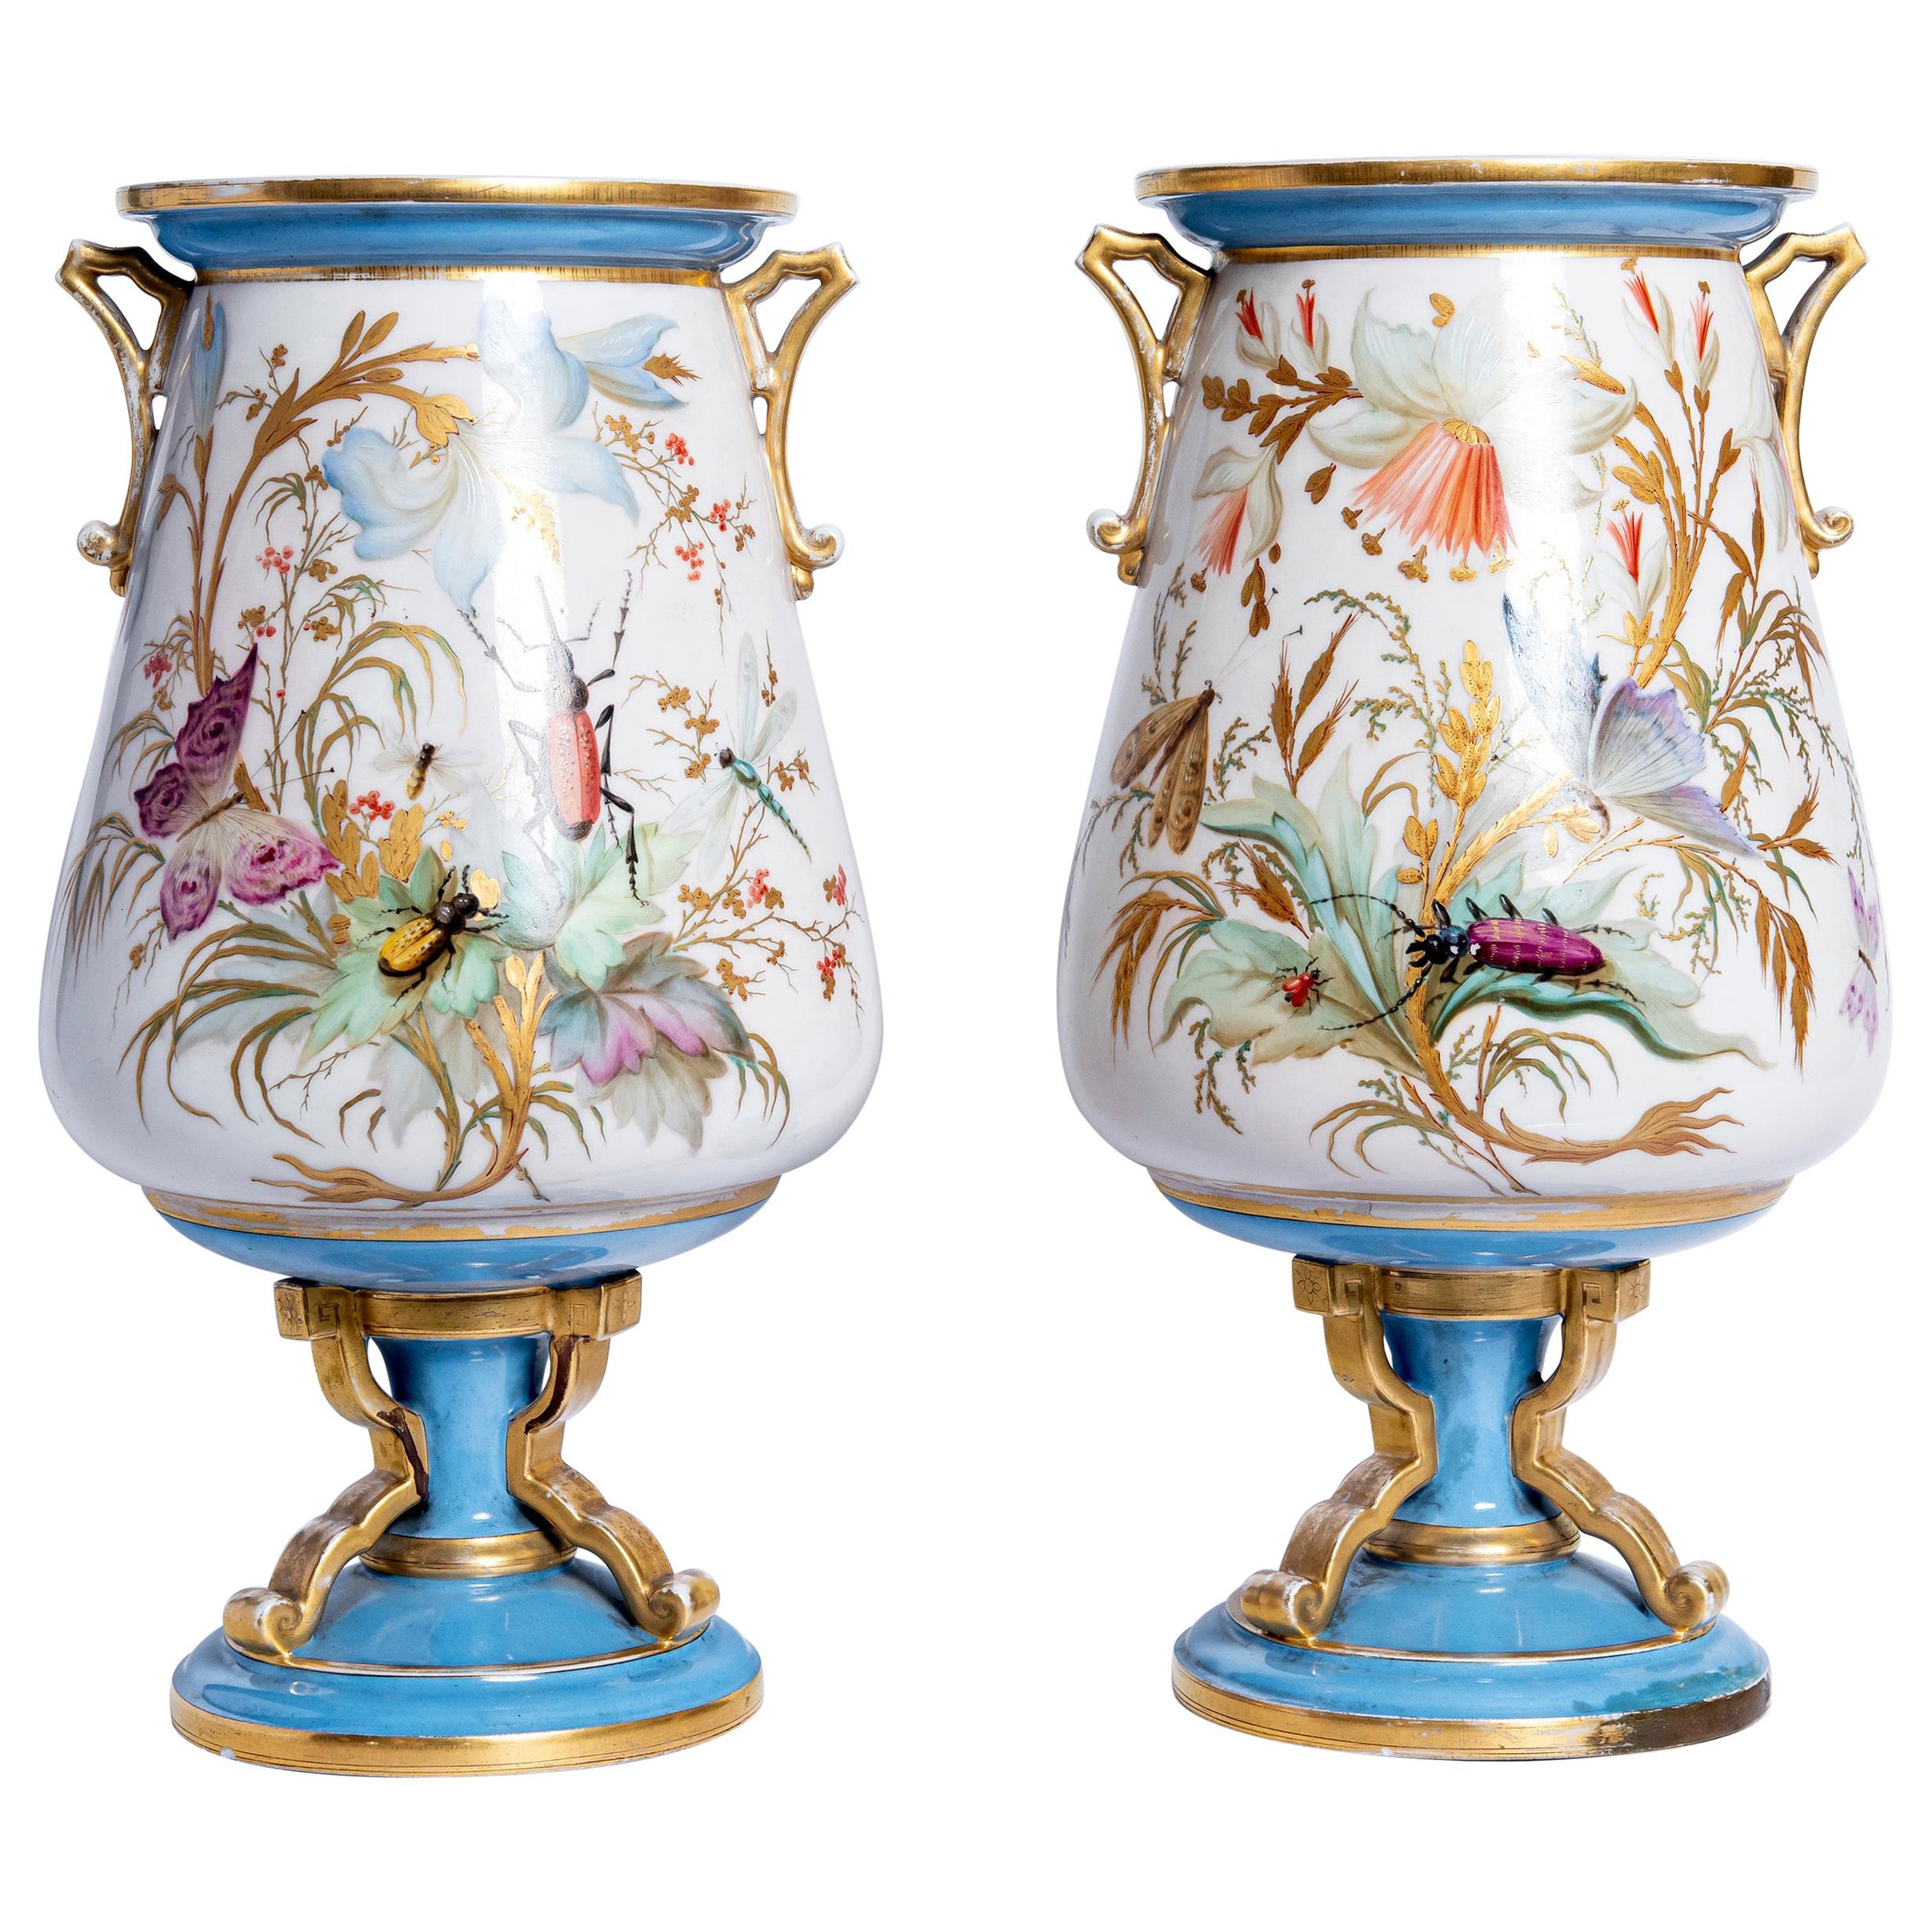 Pair of Porcelain Vases, France, Late 19th Century